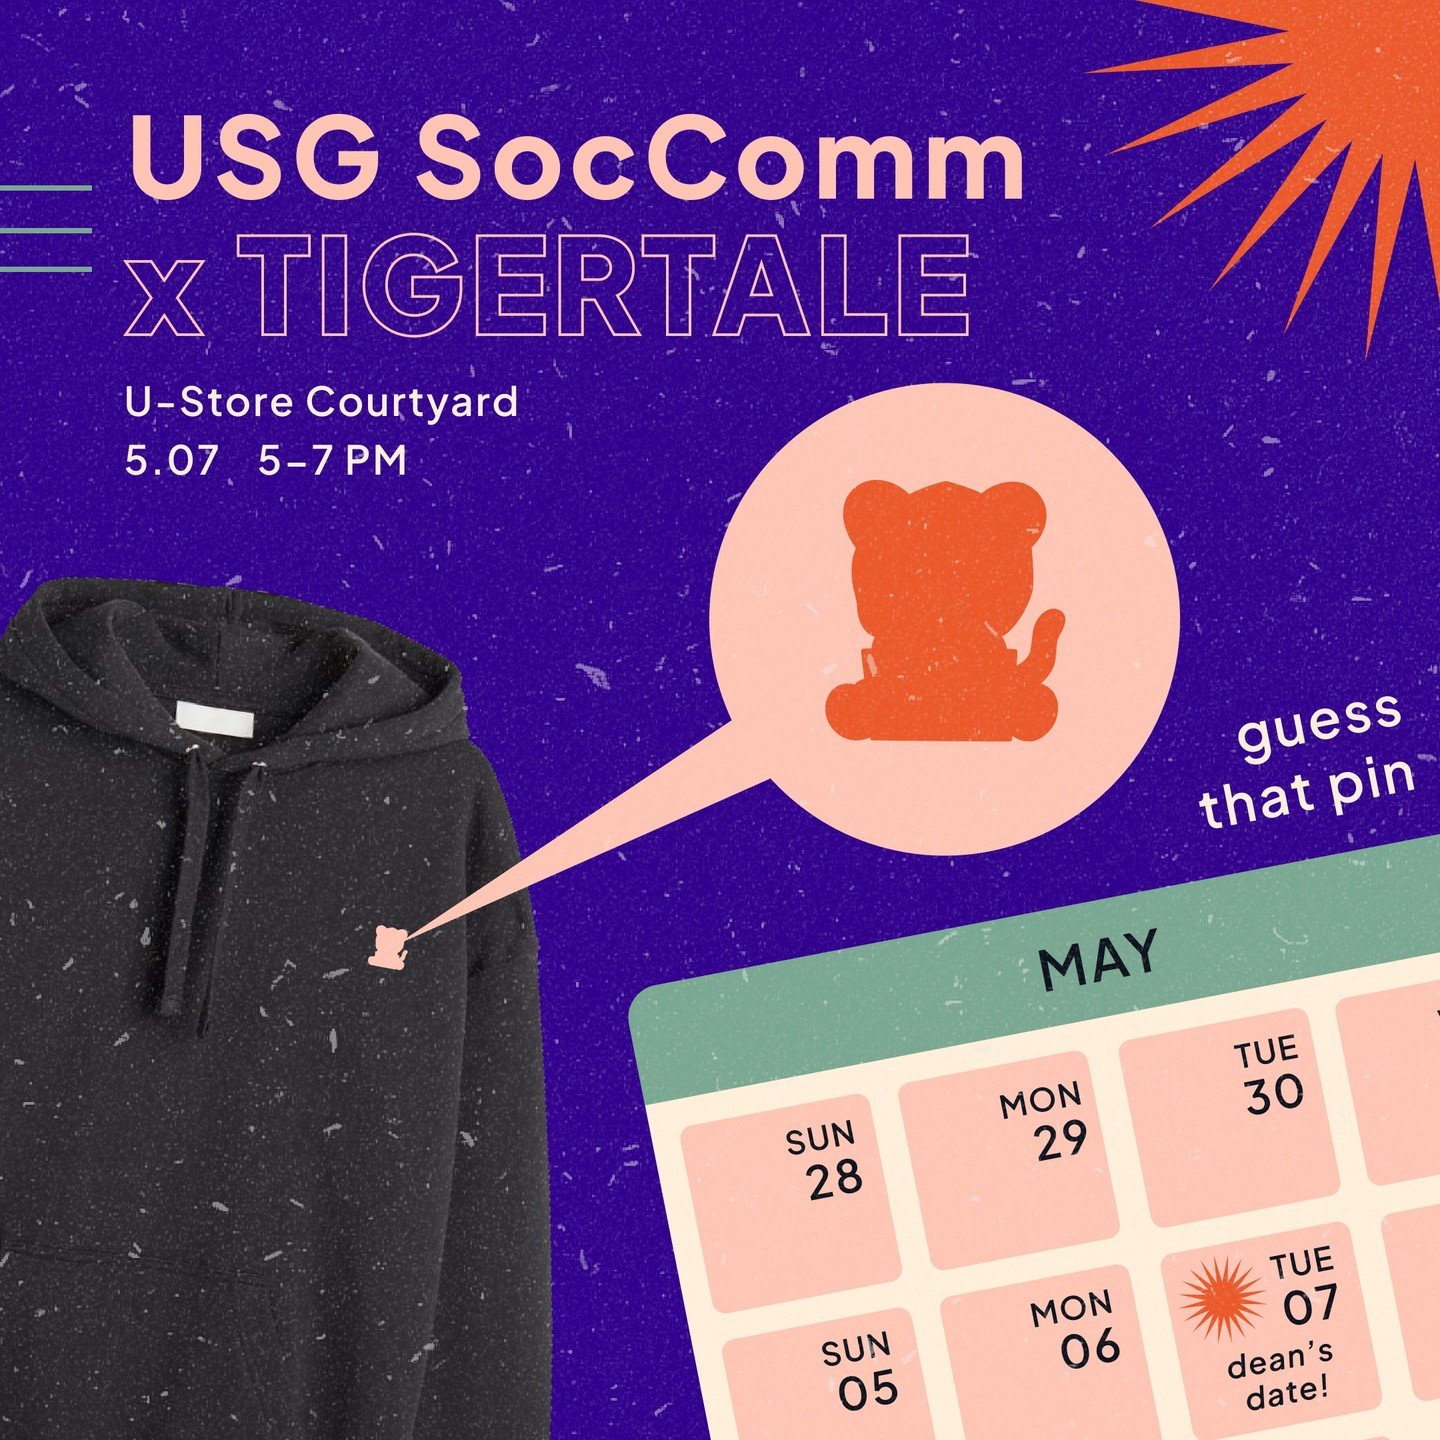 📣 We have an exciting treat for you this Dean&rsquo;s Date in partnership with @princetonsoccomm&hellip; can you guess what it is? Stop by the U-store courtyard on Tuesday, May 7th from 5-7 PM to receive the treat and celebrate your hard work!